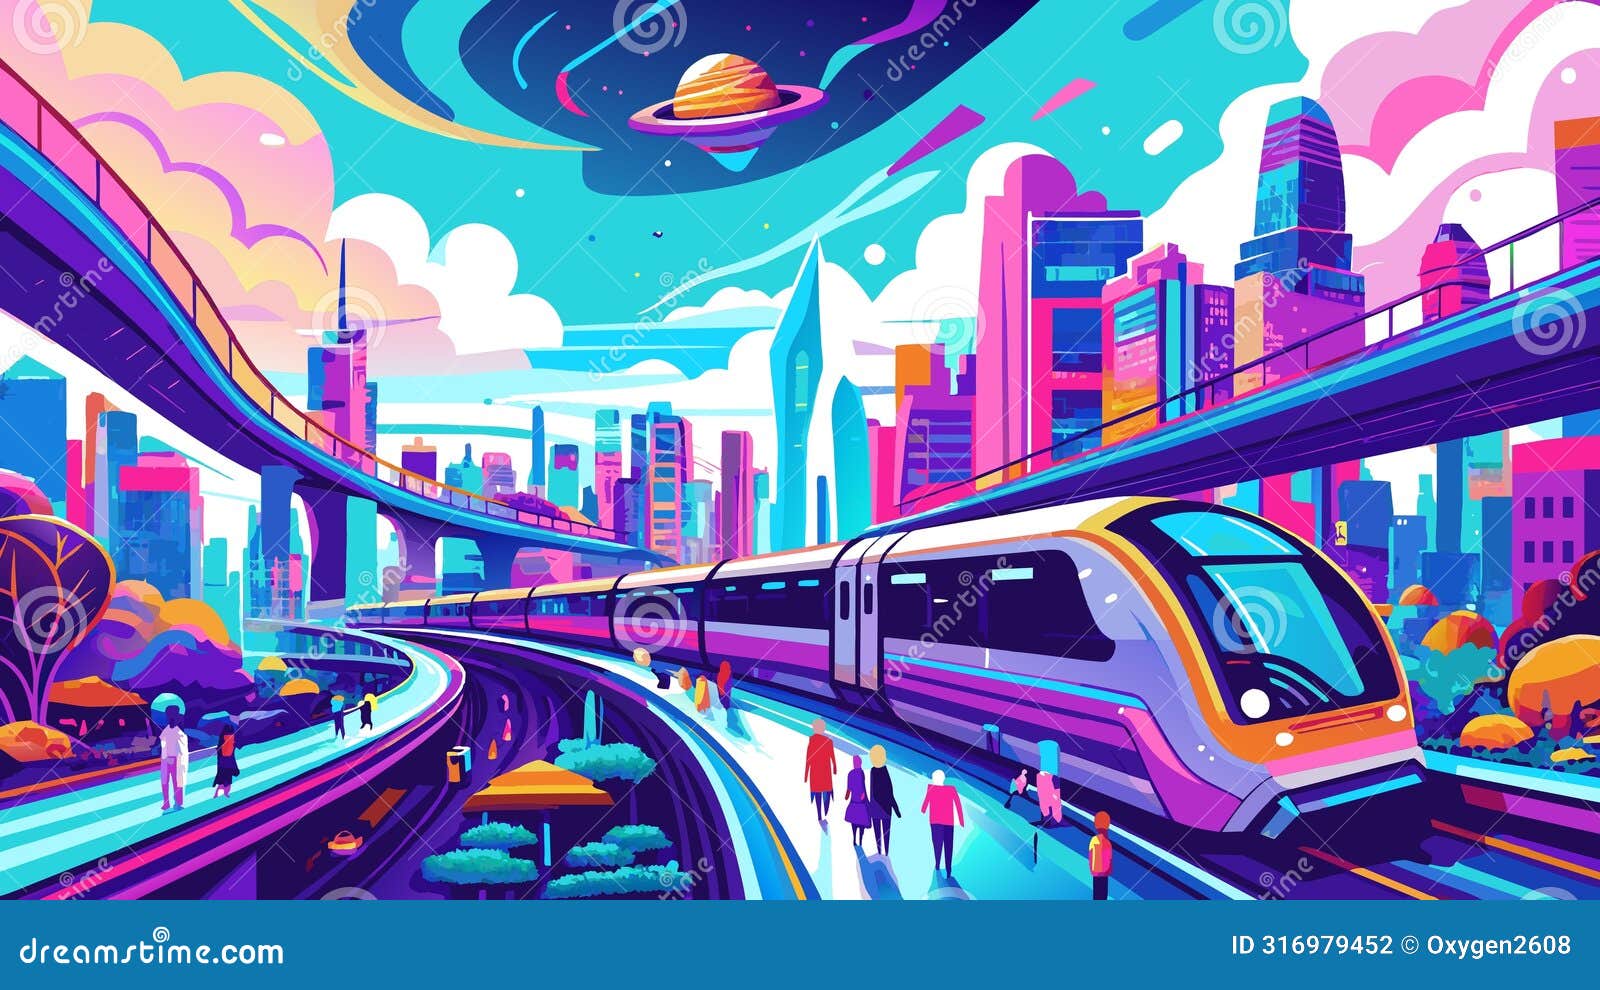 vibrant futuristic cityscape with monorail and planetary rings